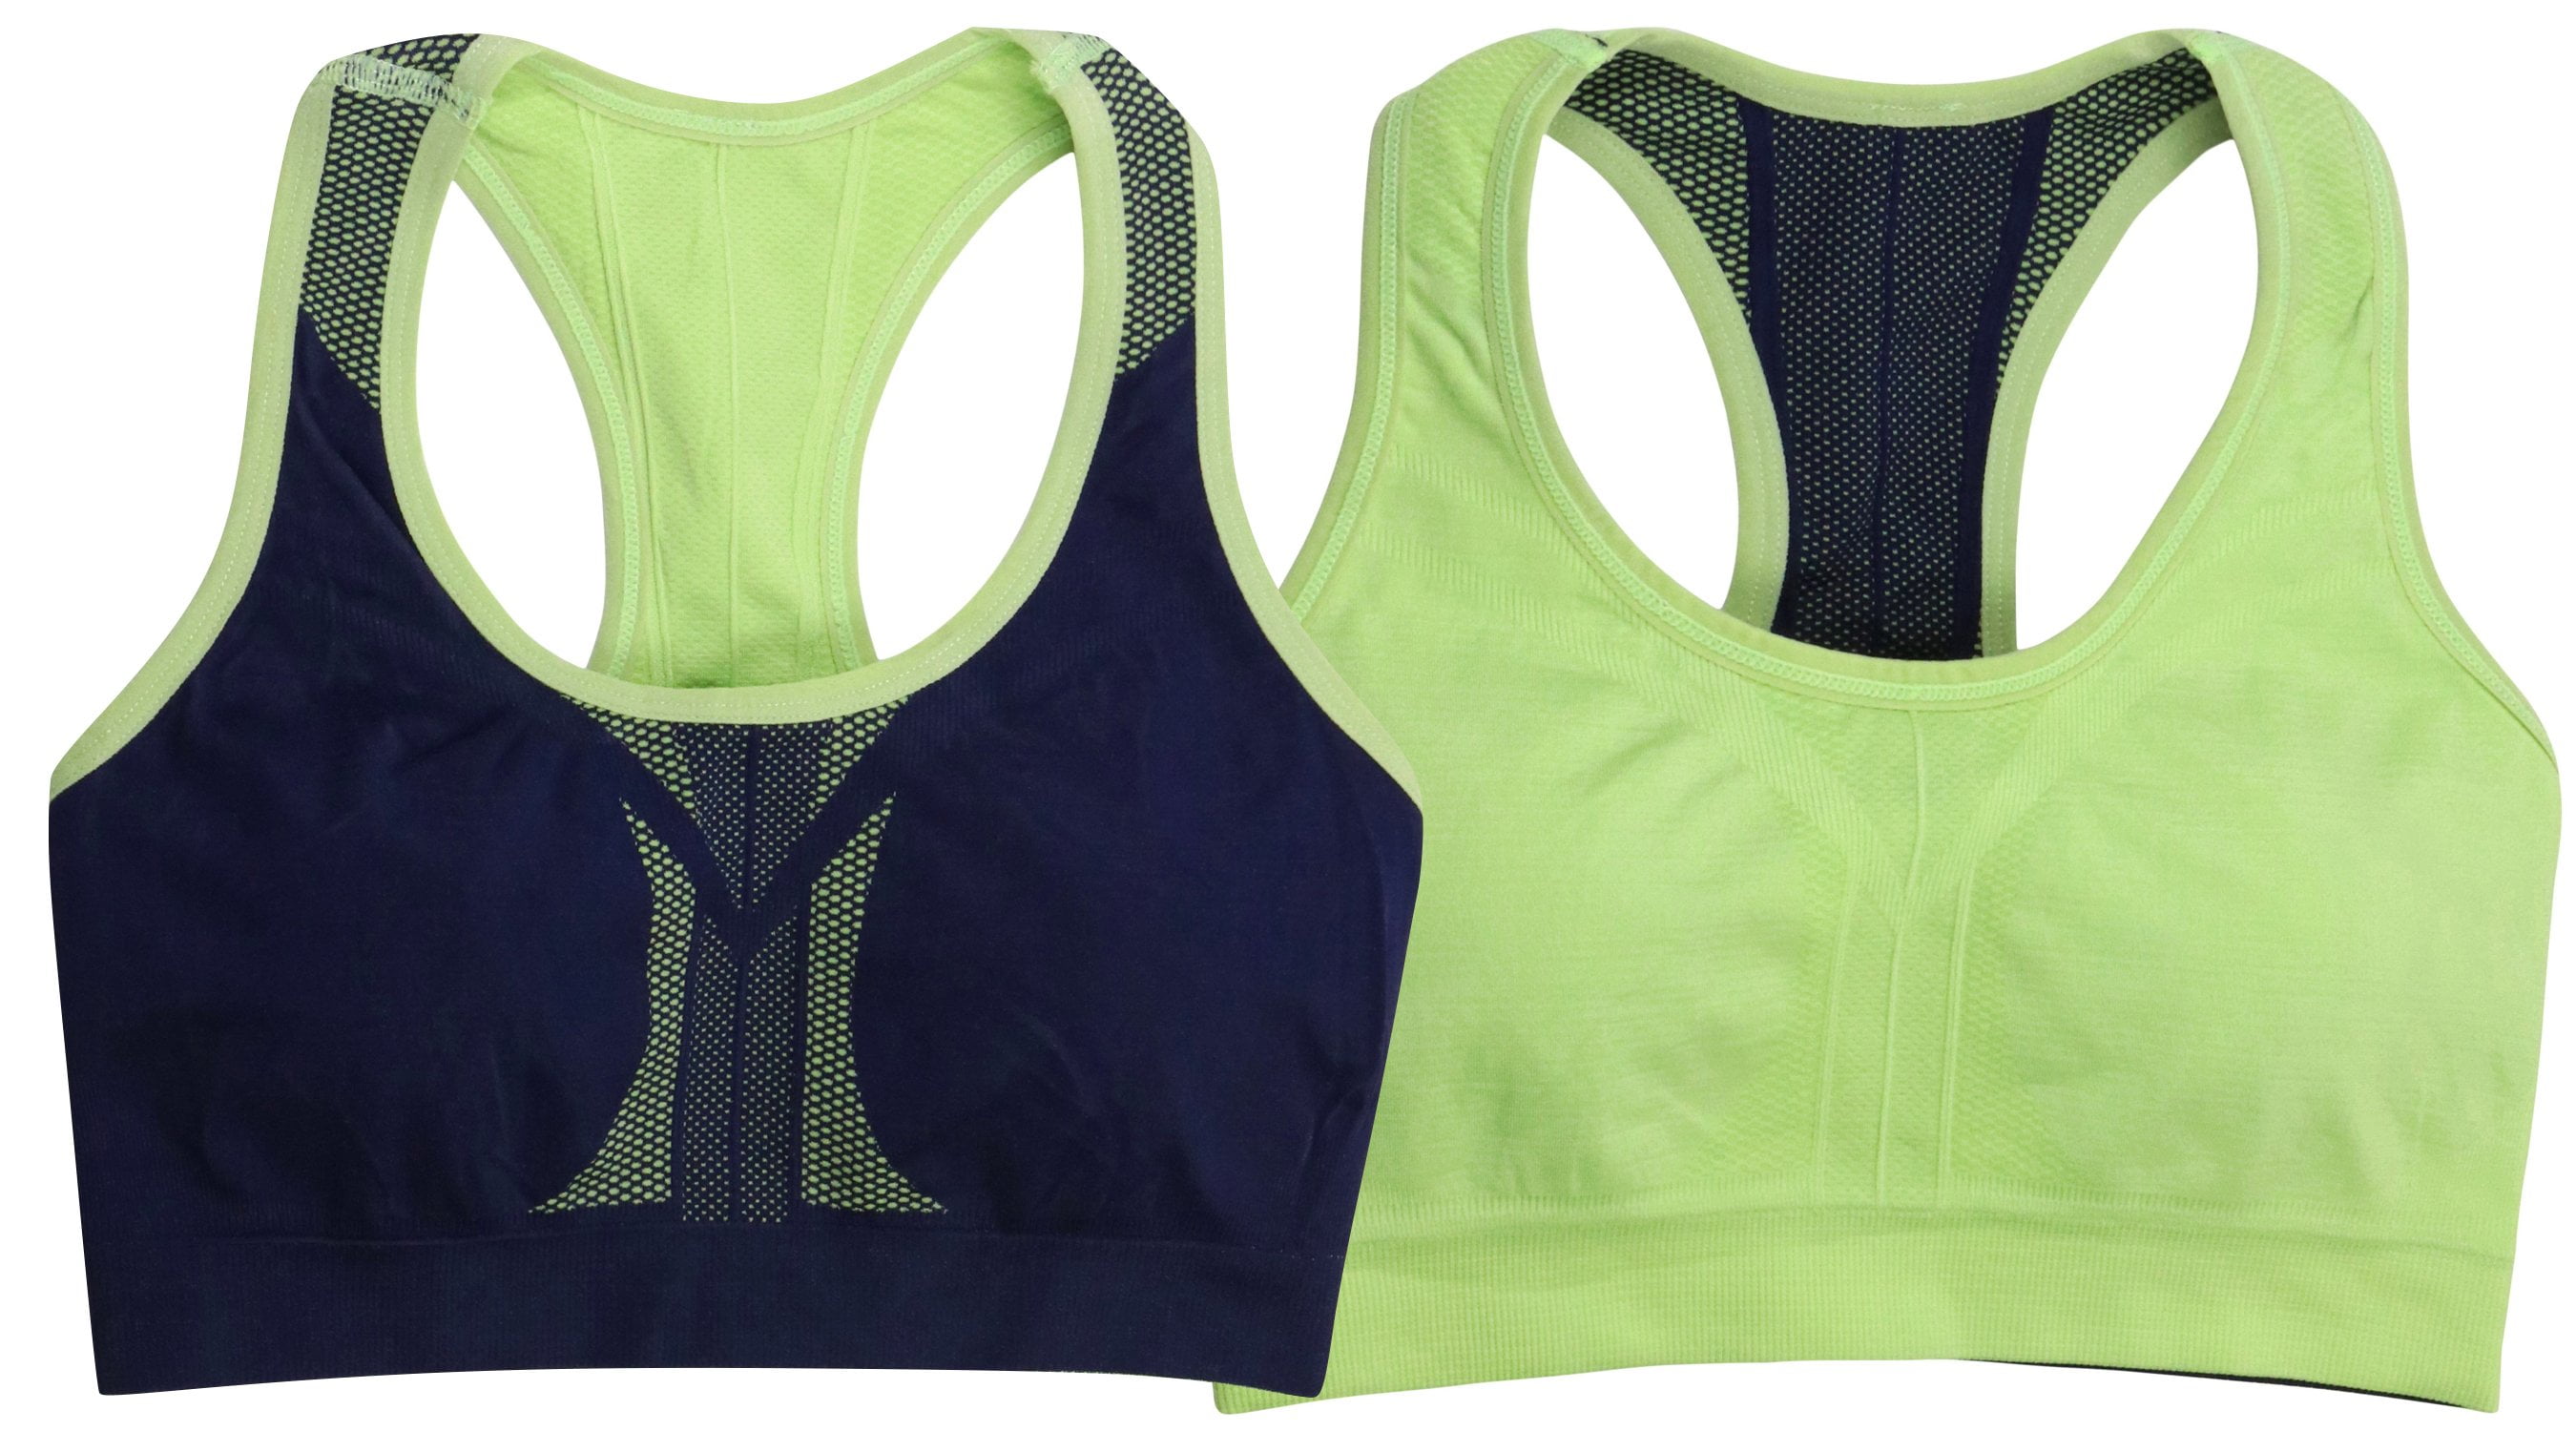 ToBeInStyle Women's Reversible Compression Double Layered Sports Bras  X-Large, Neon Green/Navy